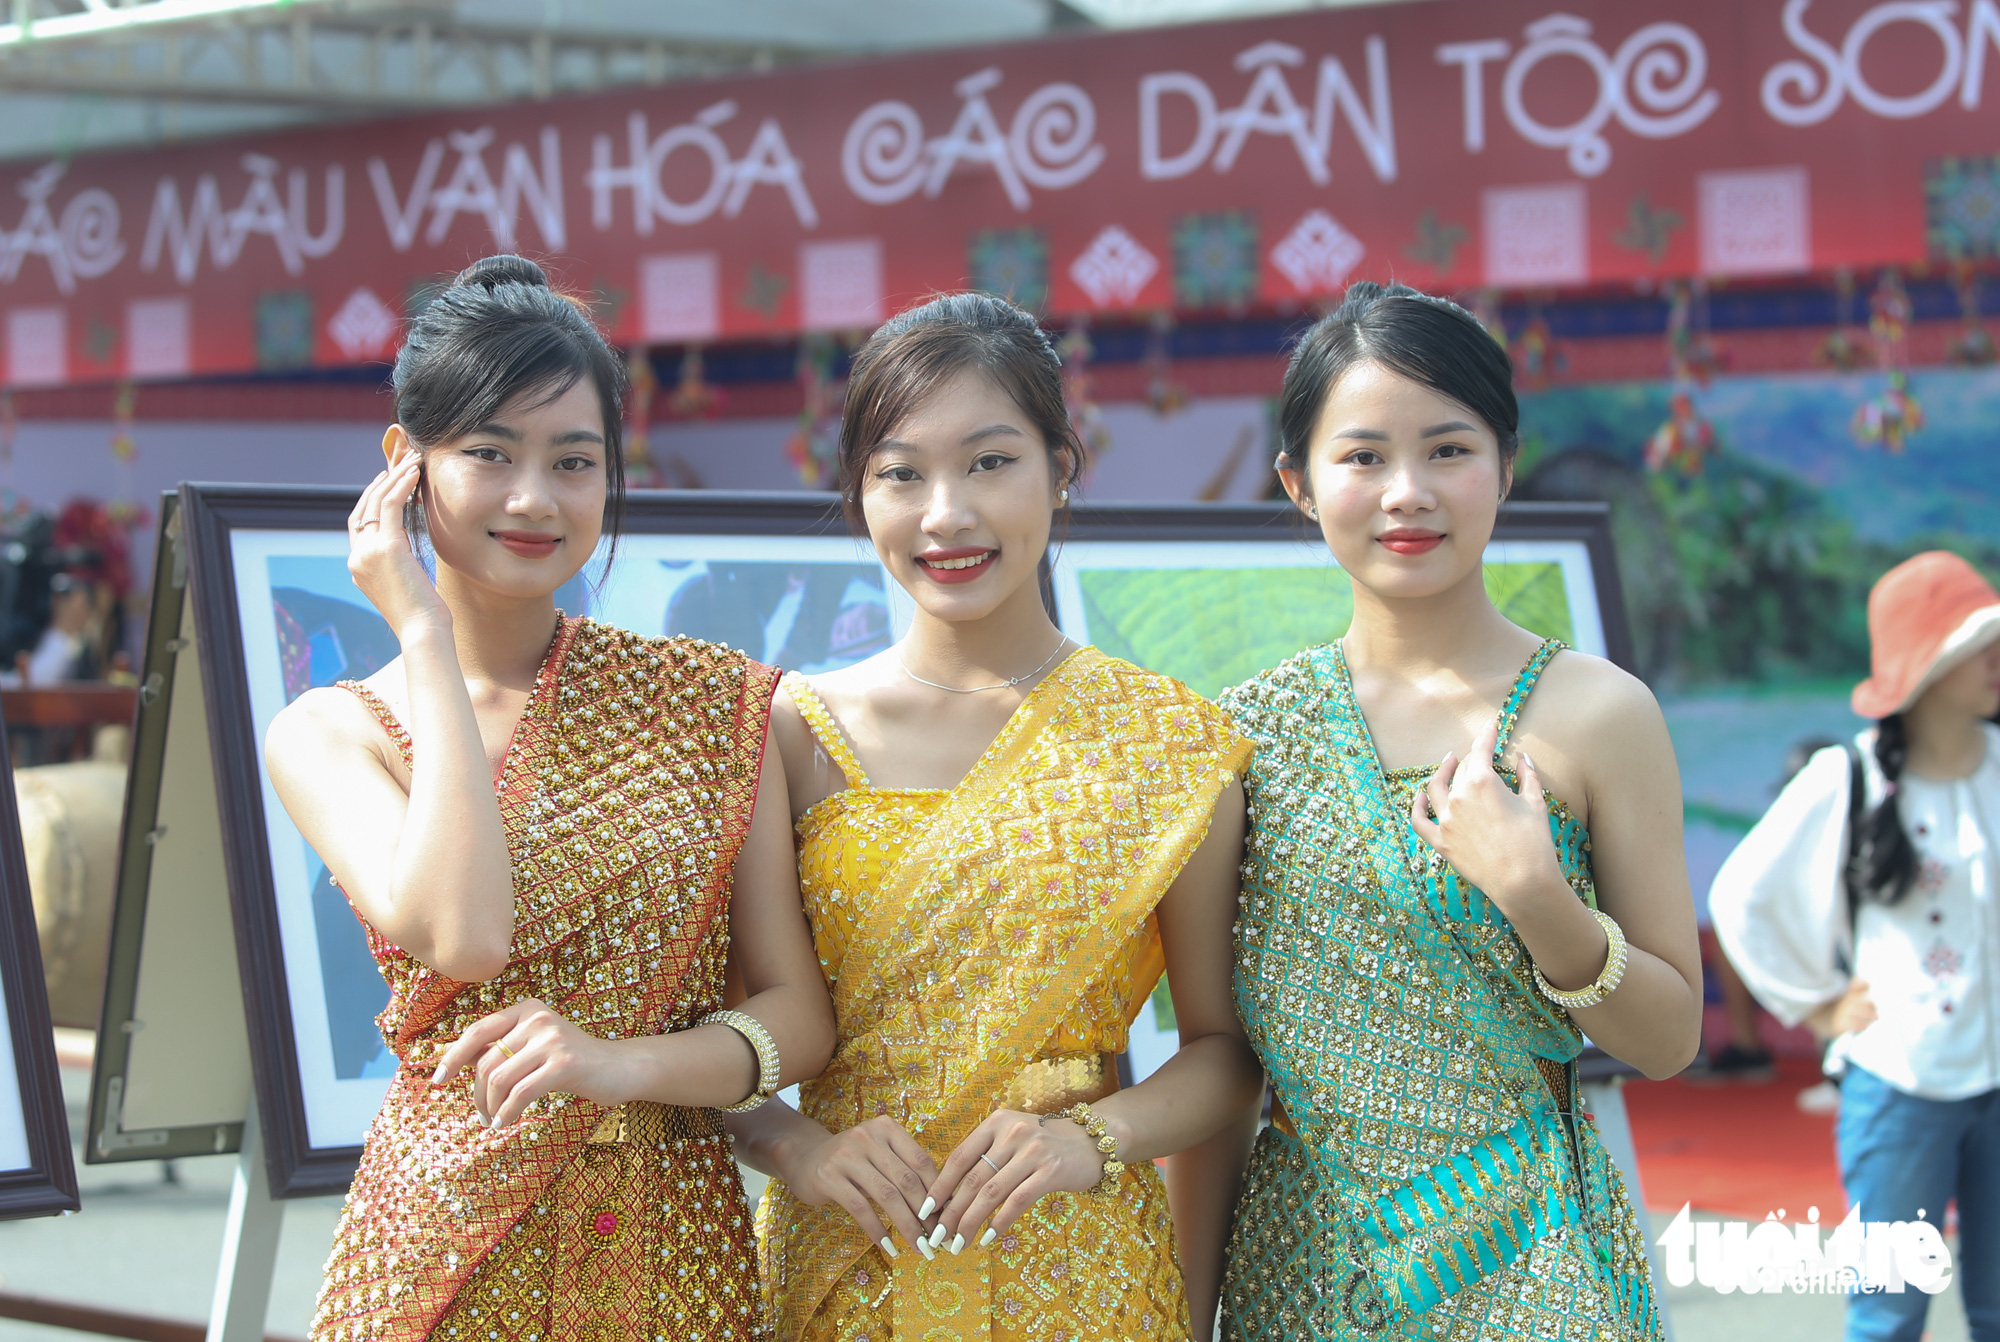 Tourists don a traditional Khmer costume at the Vietnam Ethnic Village Of Culture and Tourism in Son Tay District, Hanoi. Photo: Nguyen Hien / Tuoi Tre